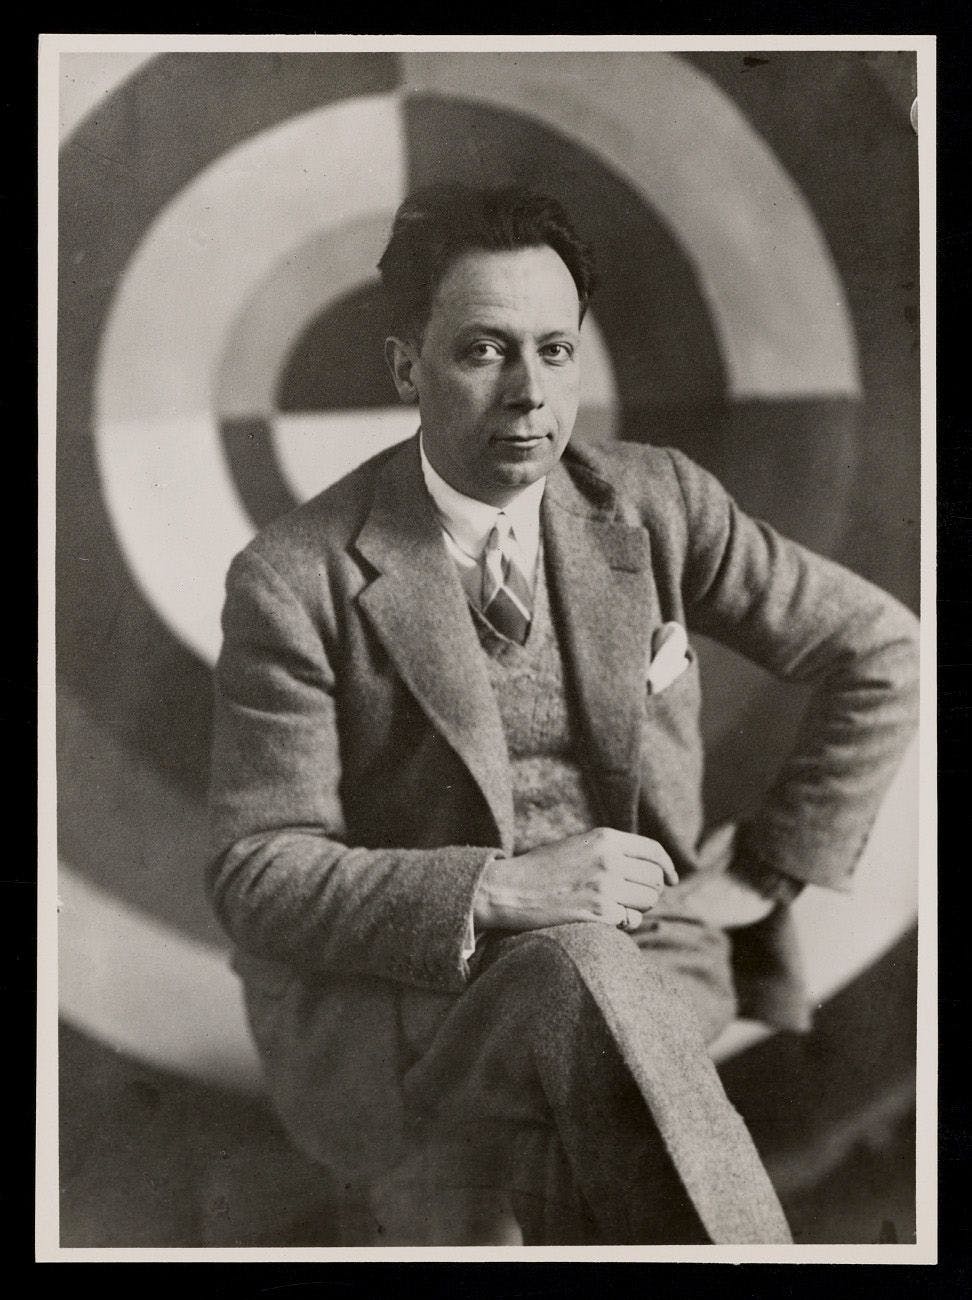 From Emily Hall Tremaine's artist file for Robert Delaunay